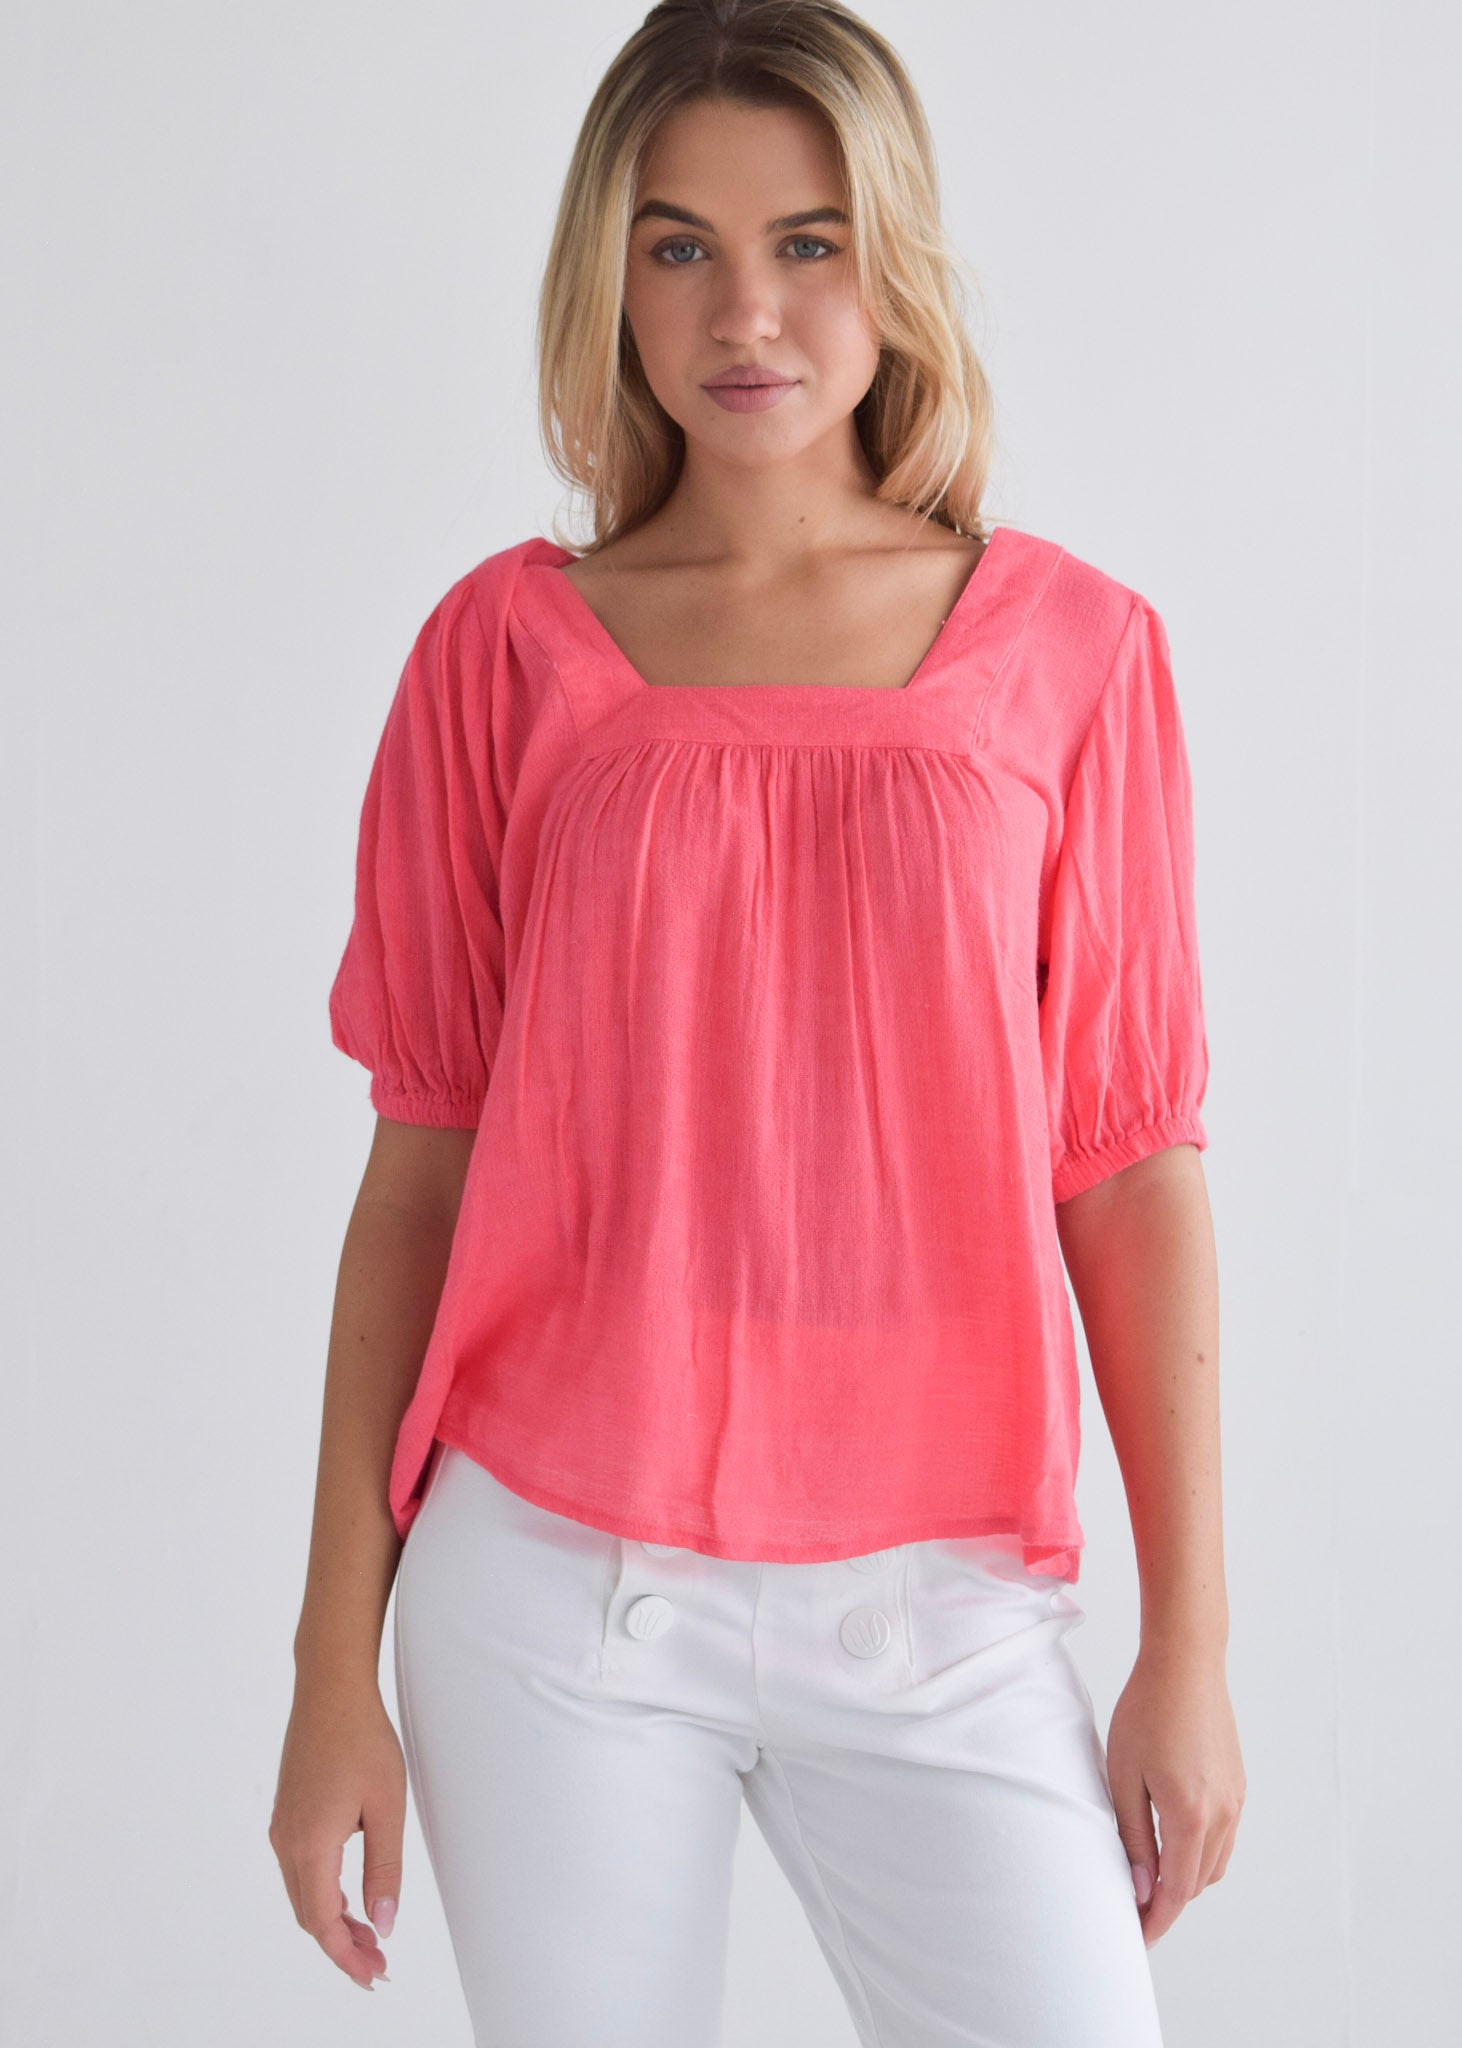 Square Neck Top - Knockout Pink